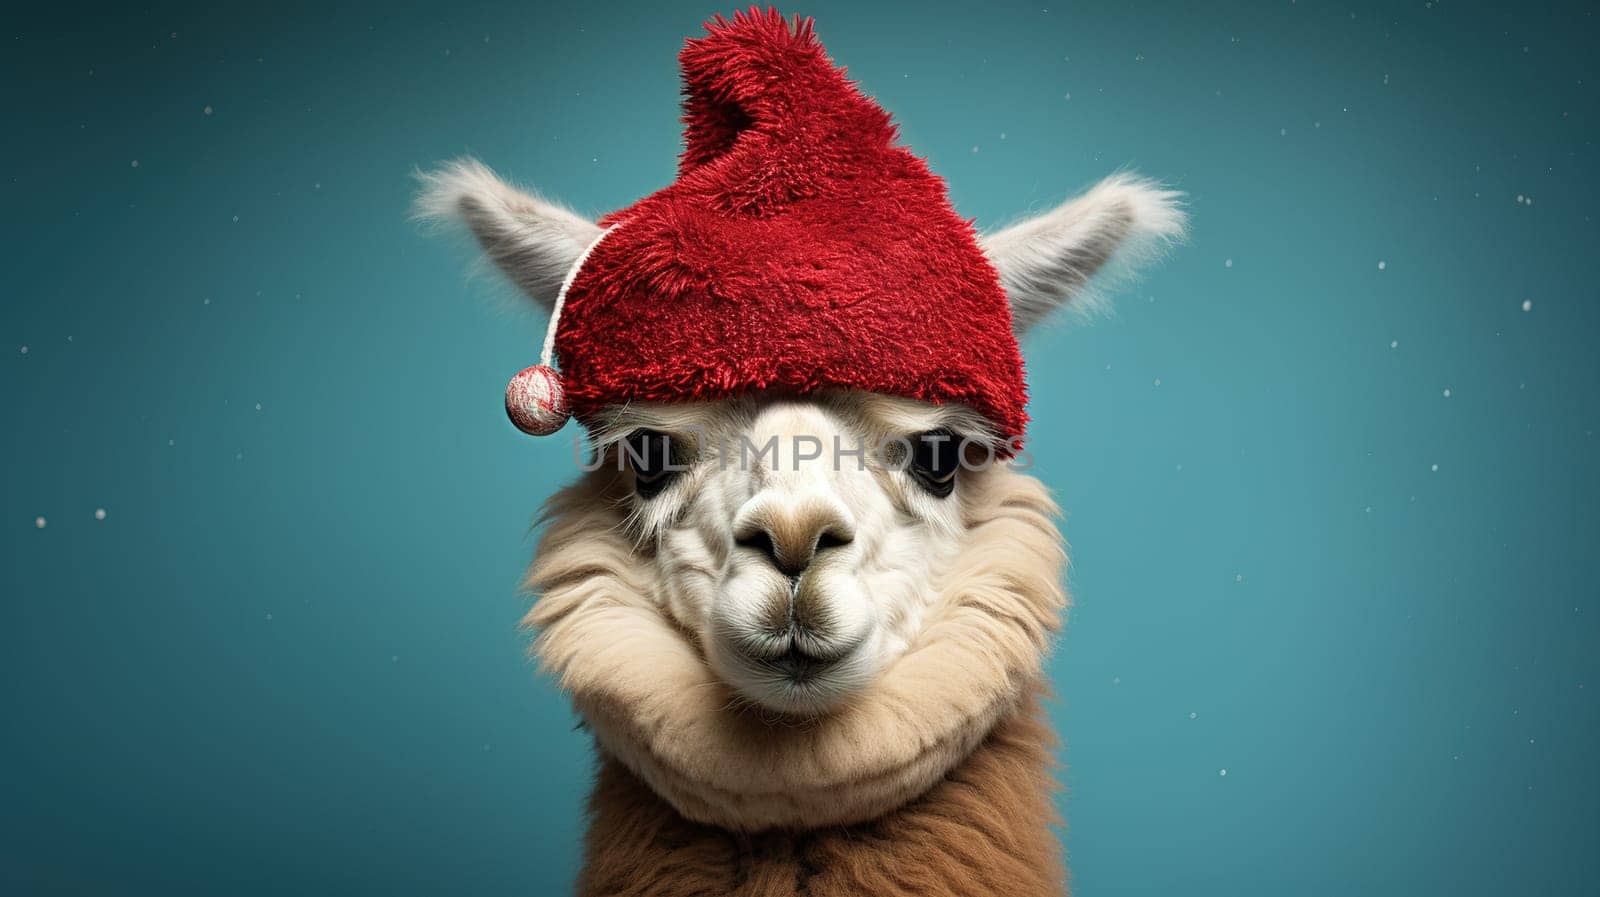 Alpaca in a Christmas hat on a blue background, pet portrait, copy space, cheerful domestic farm animals by KaterinaDalemans